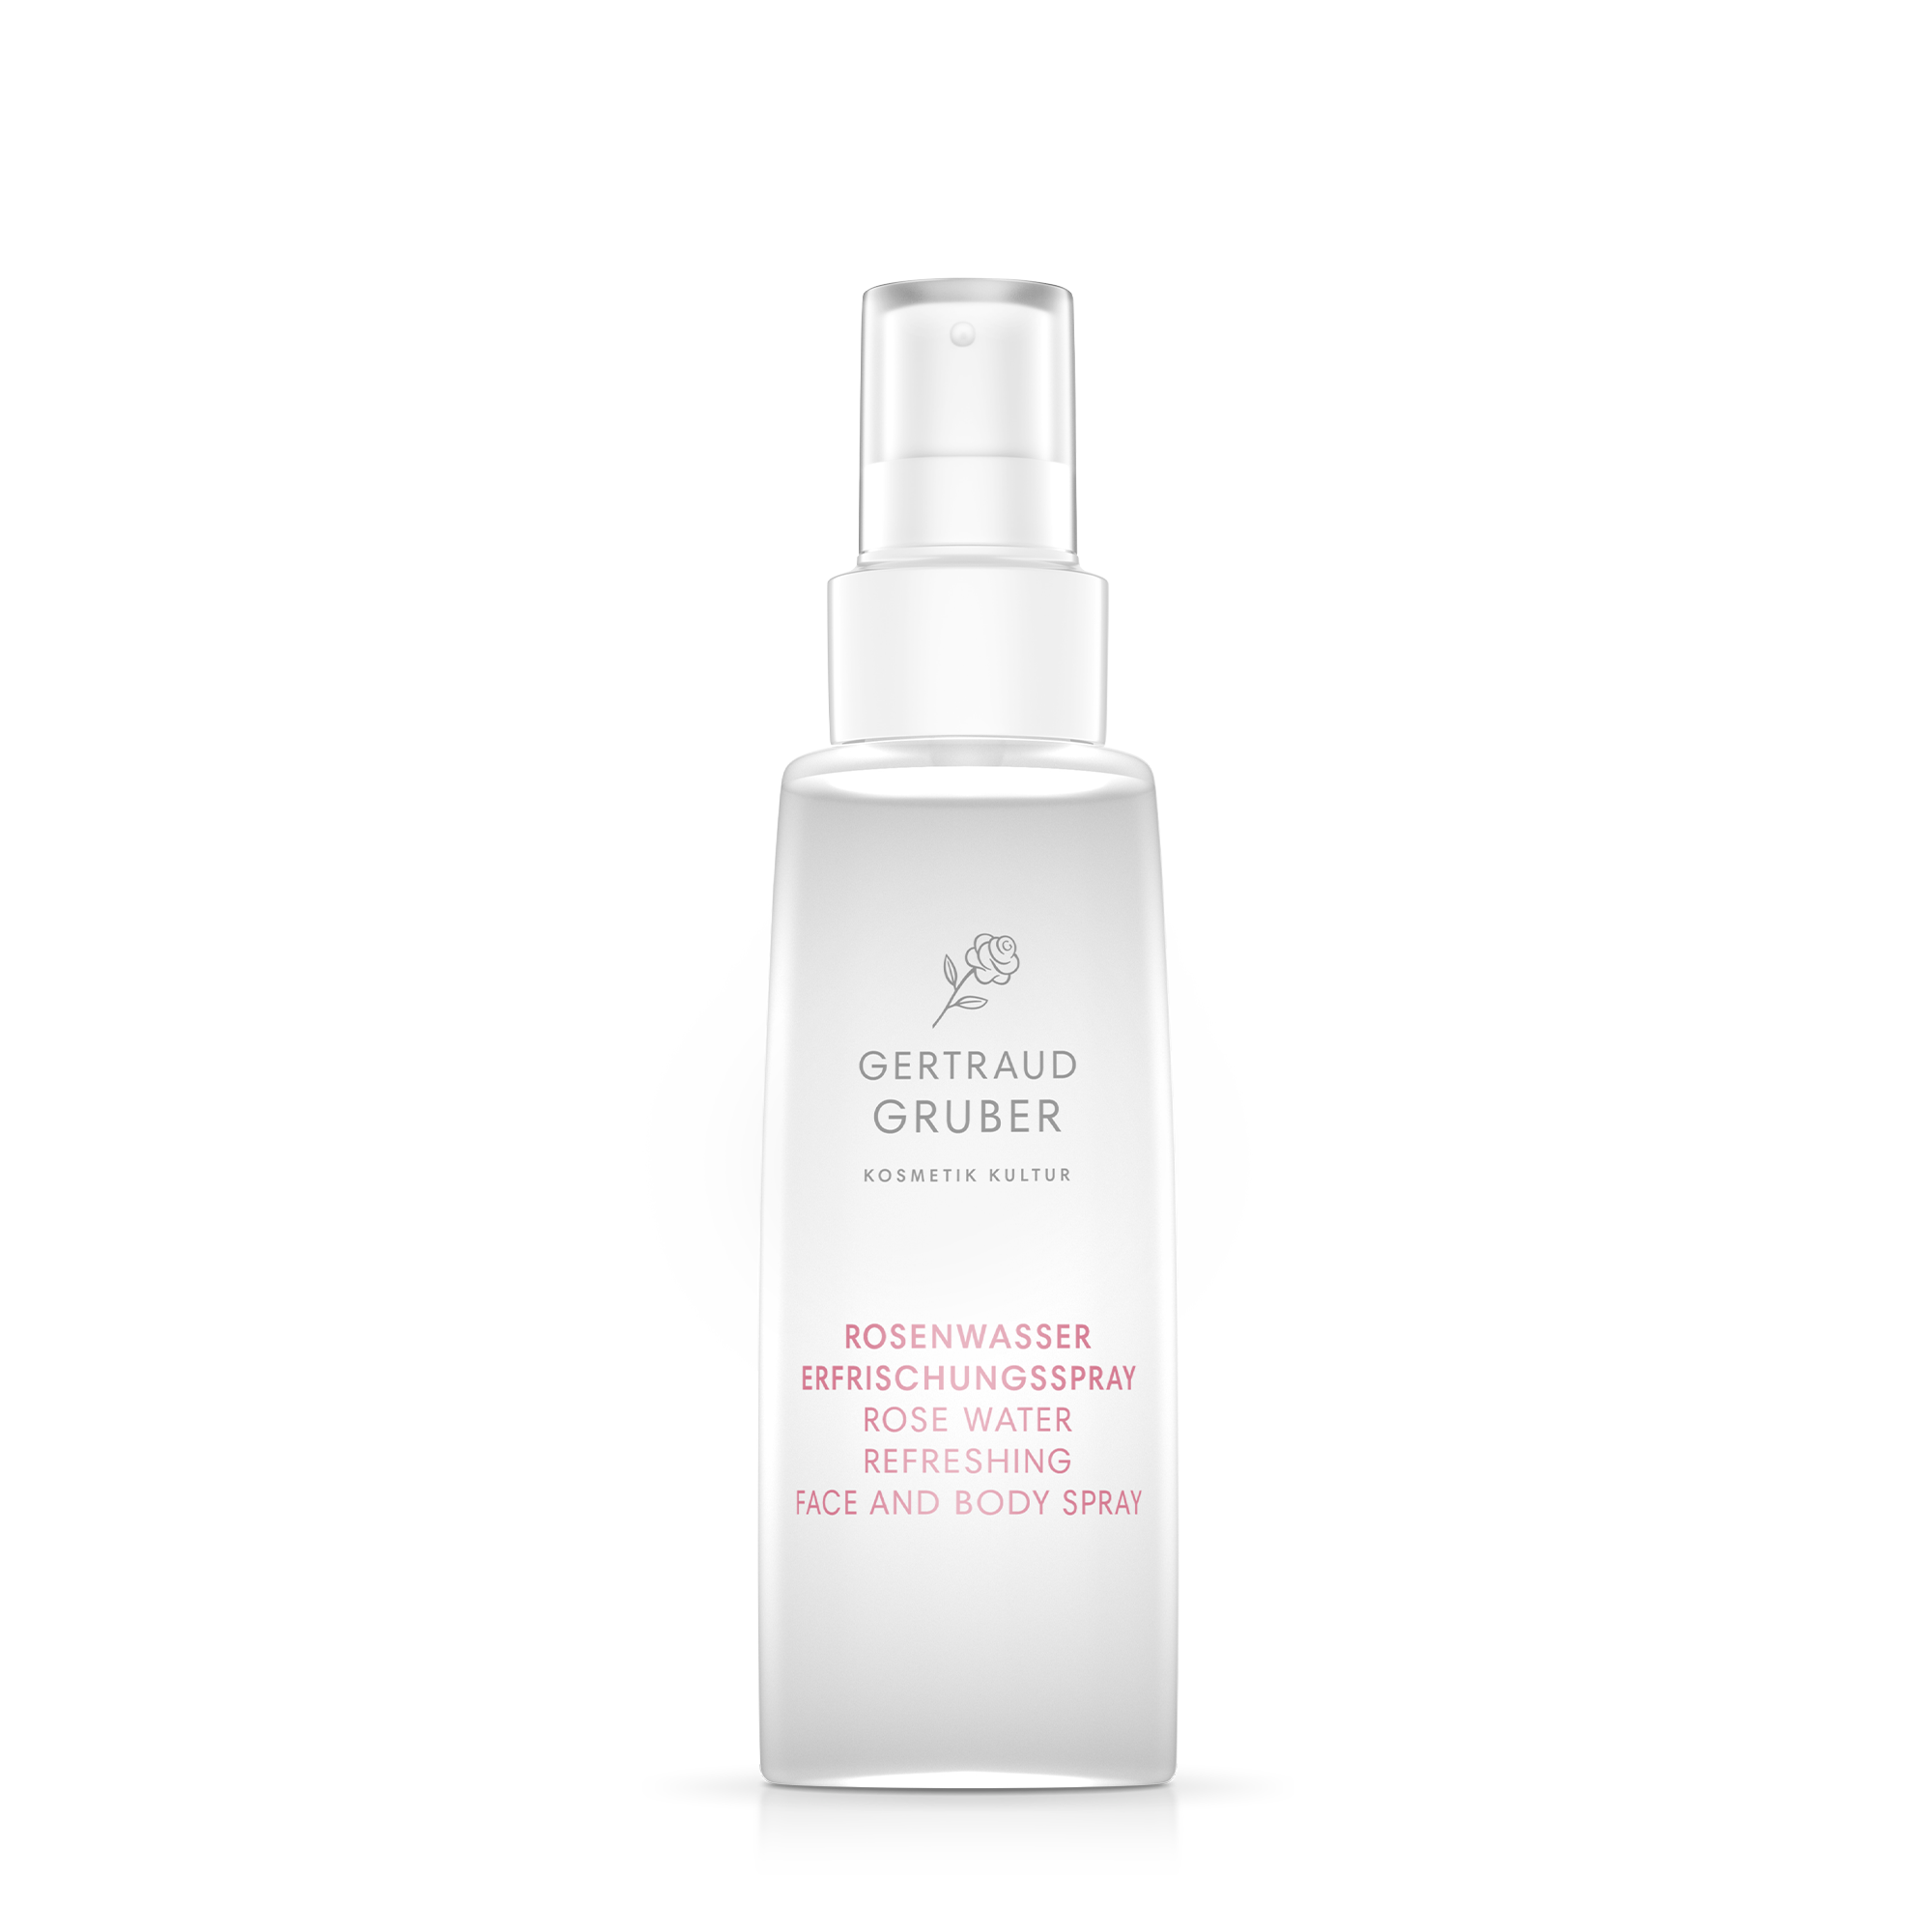 ROSE WATER REFRESHING FACE AND BODY SPRAY